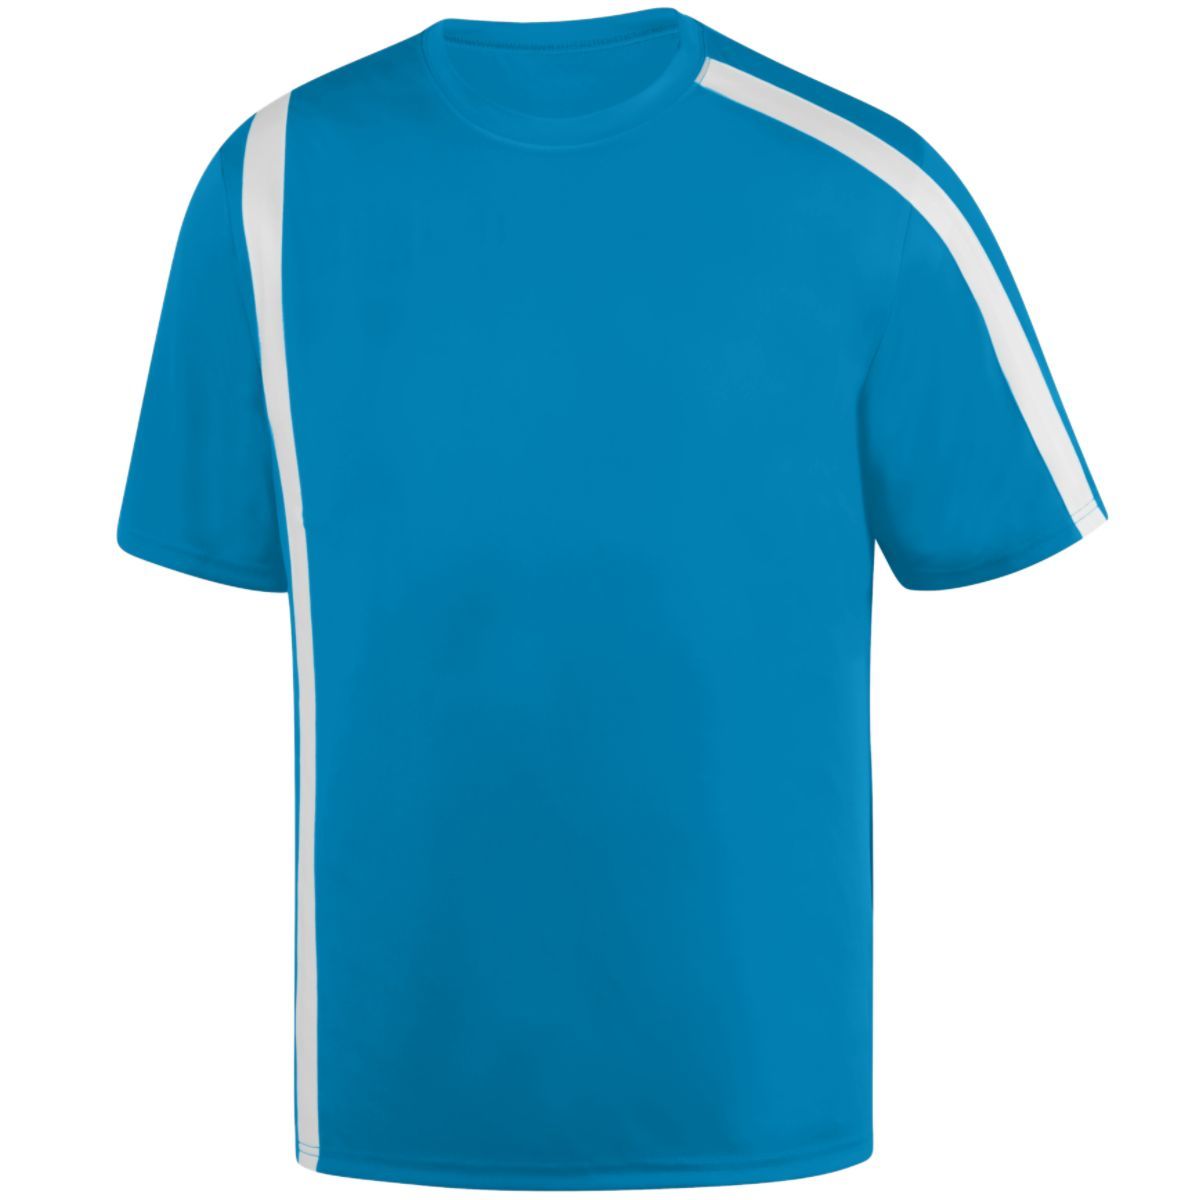 Augusta Sportswear Attacking Third Jersey in Power Blue/White  -Part of the Adult, Adult-Jersey, Augusta-Products, Soccer, Shirts, All-Sports-1 product lines at KanaleyCreations.com